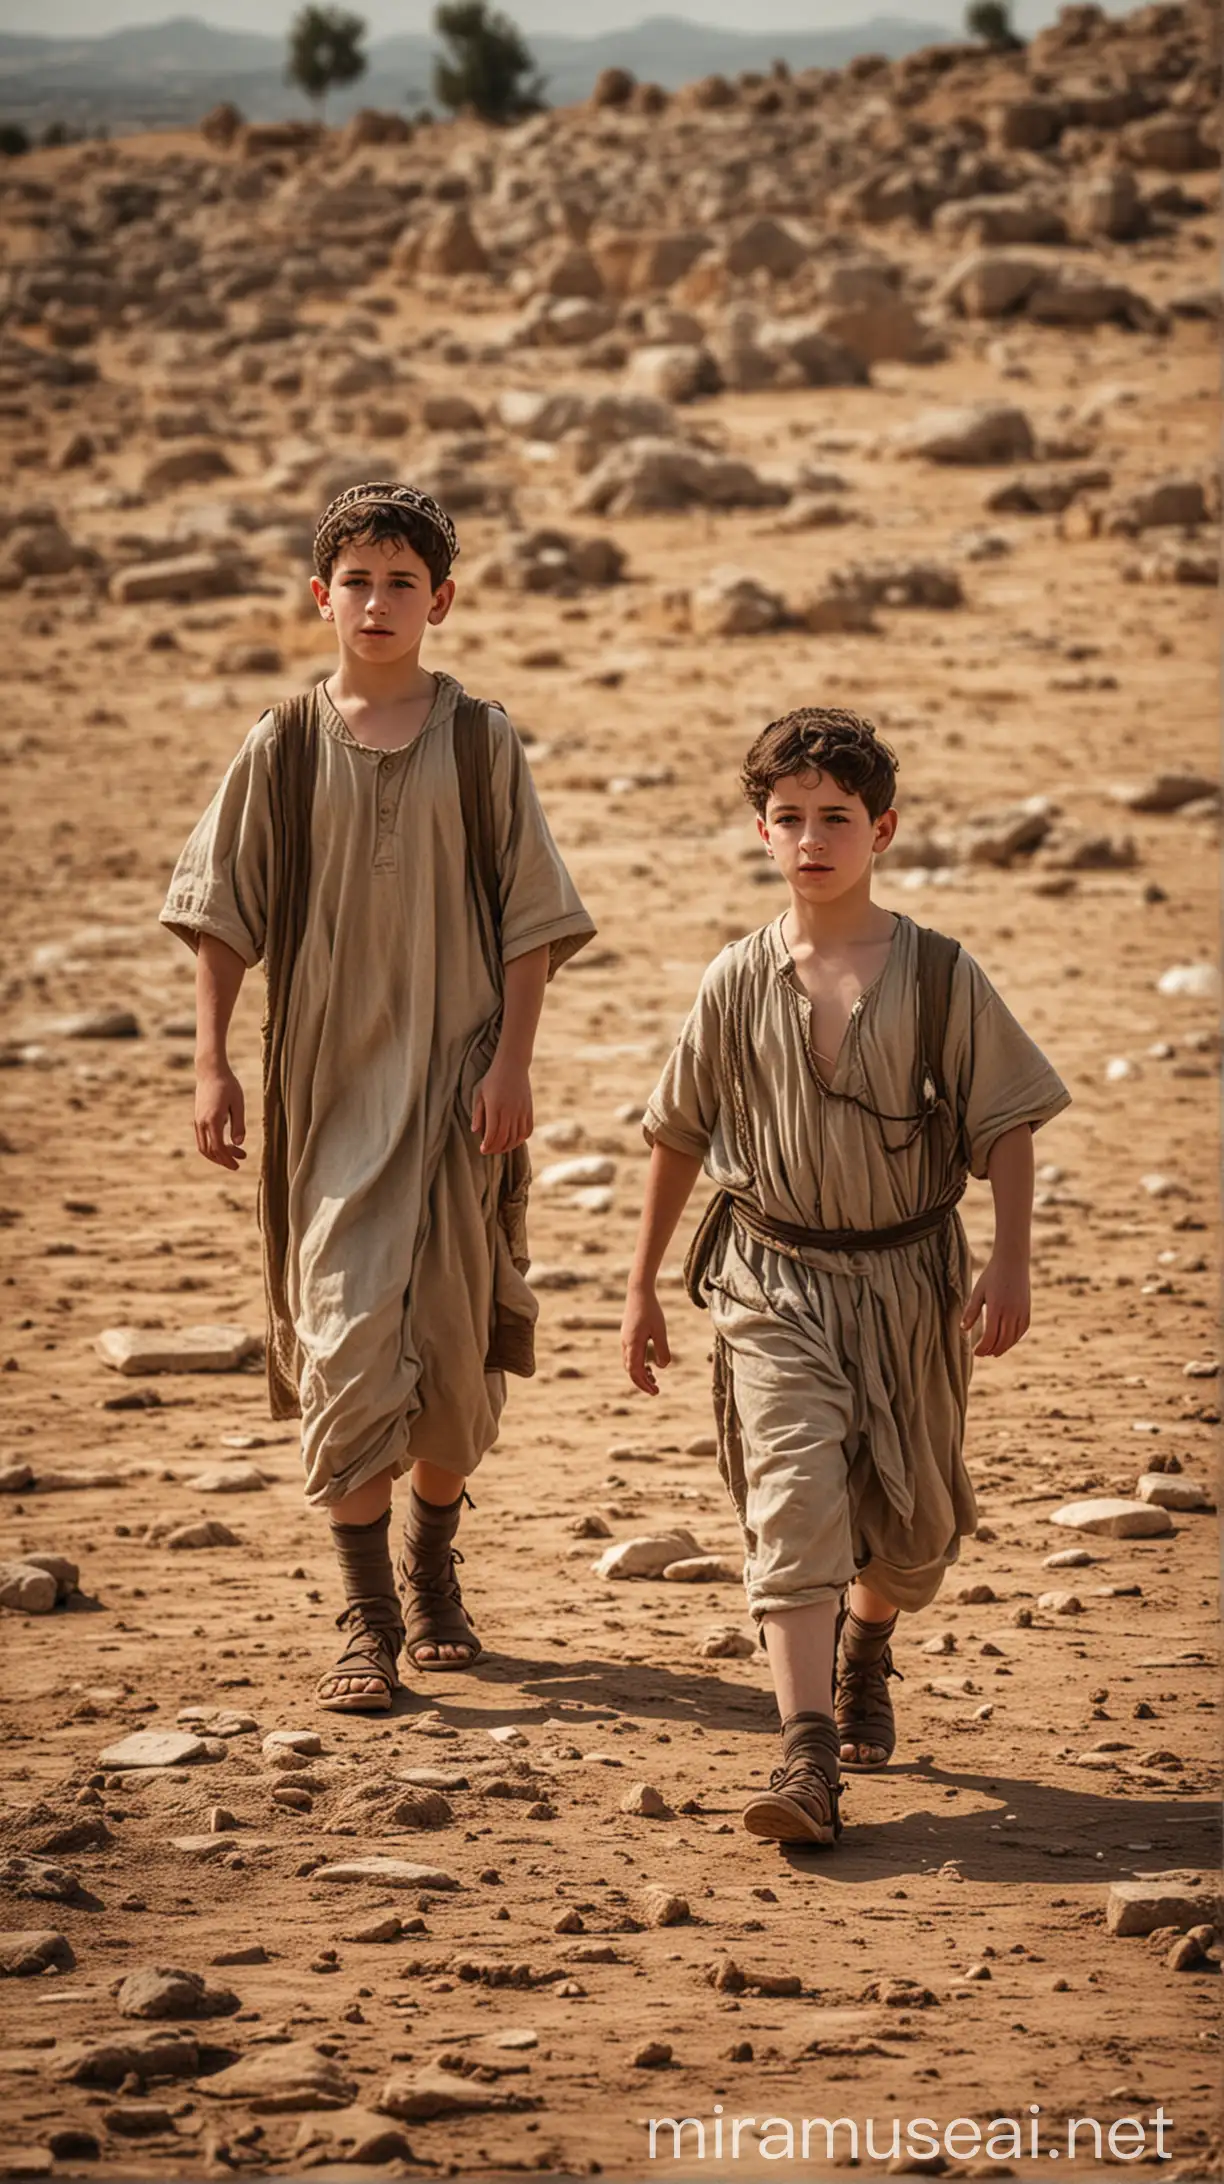 Two young Jewish boy in ancient field in ancient world 